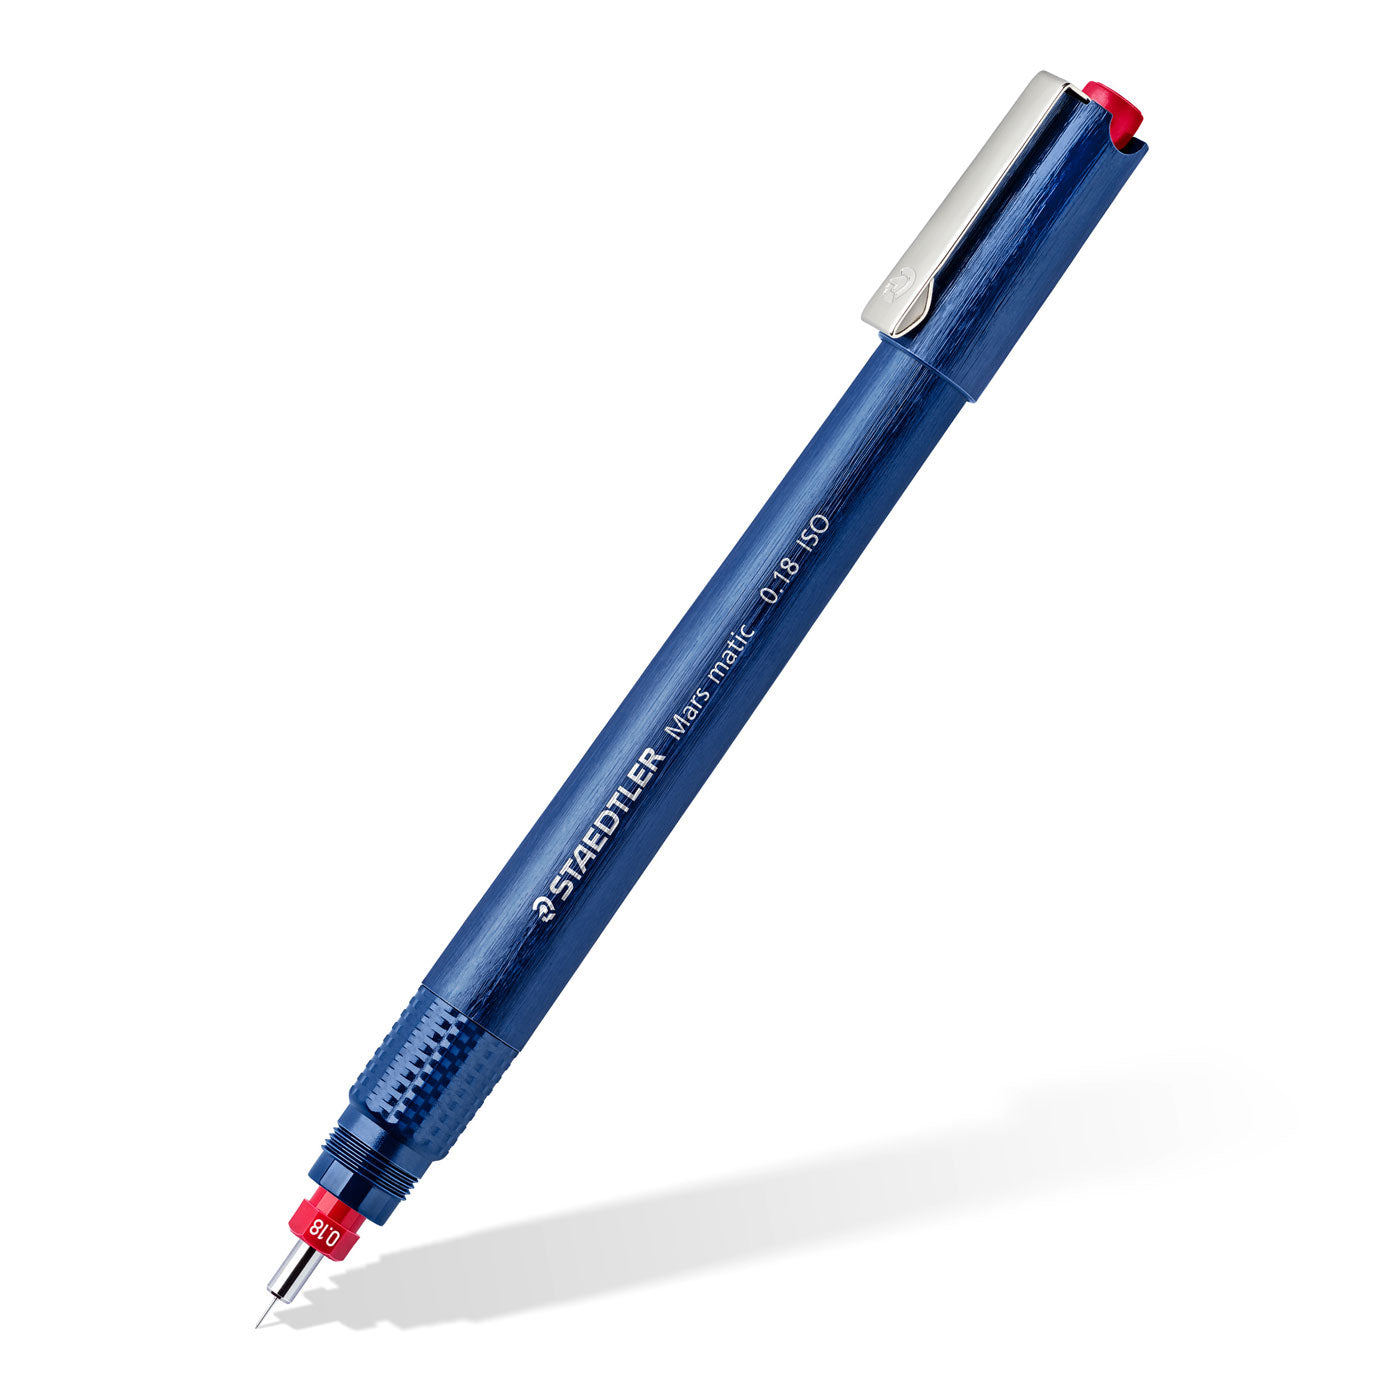 Staedtler Mars Matic 700 M018 Technical Drawing Pen 0.18mm